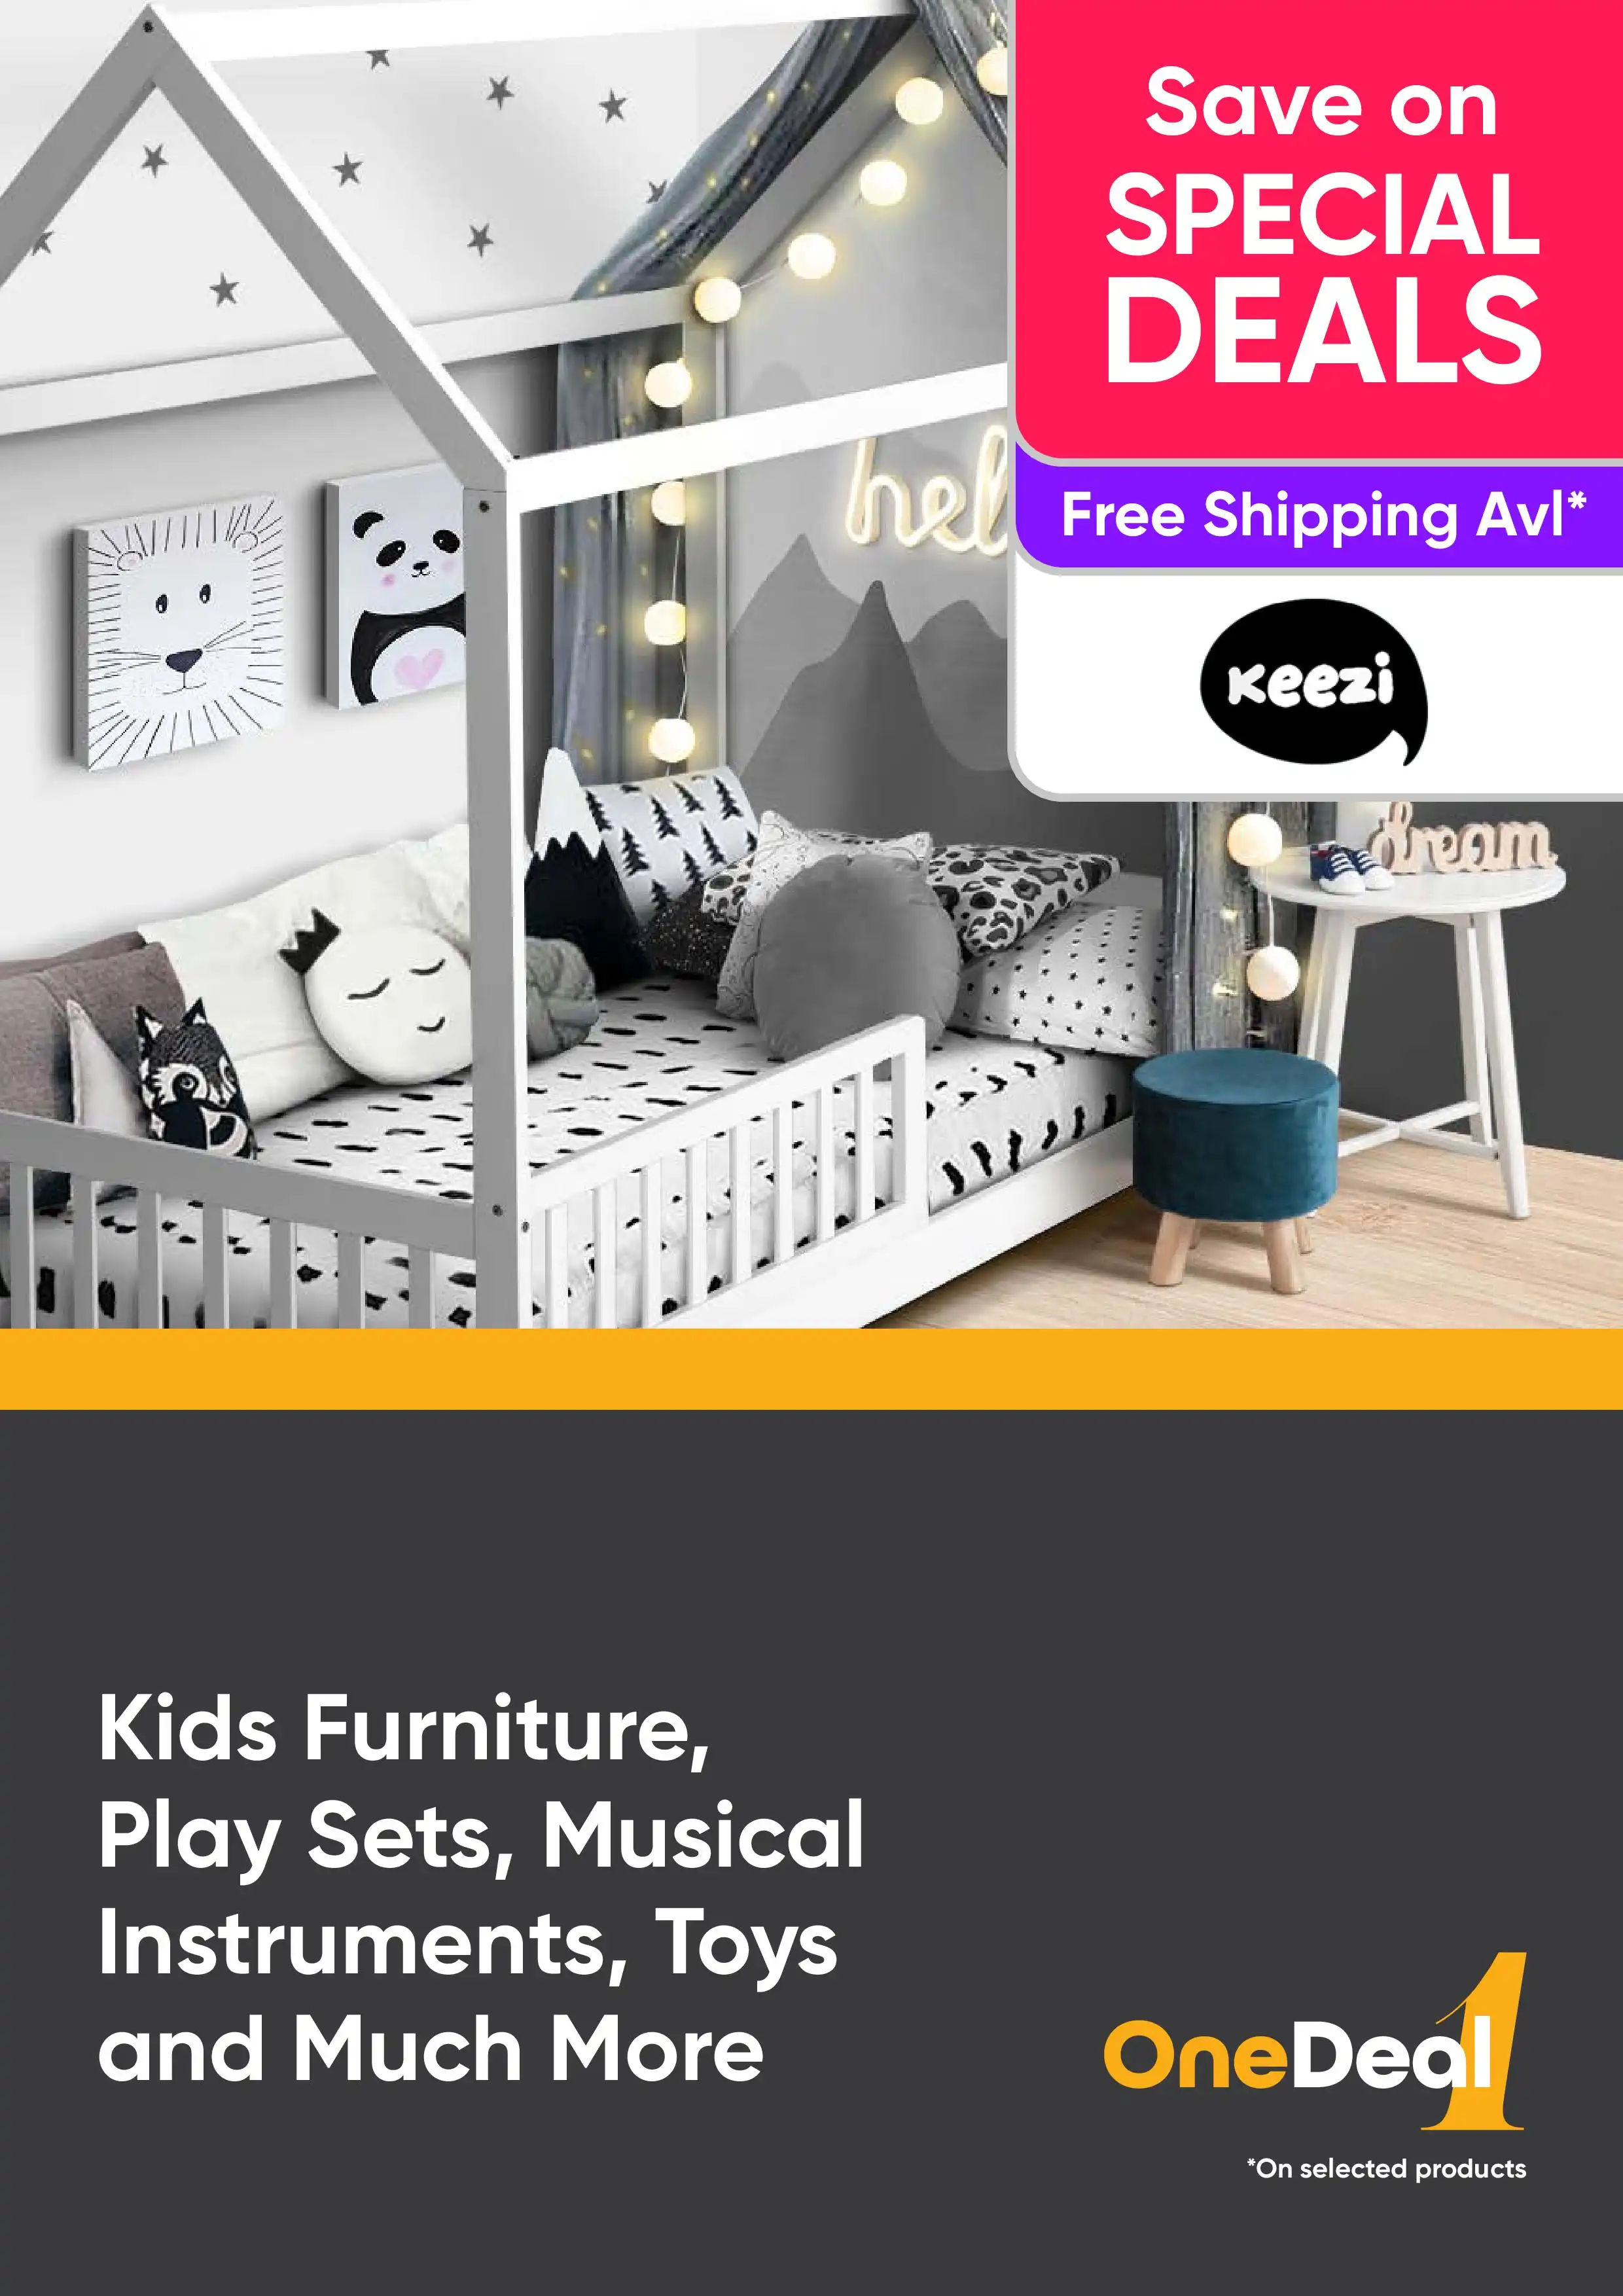 Shop Deals on Kids Furniture, Play Sets, Musical Instruments, Toys and More